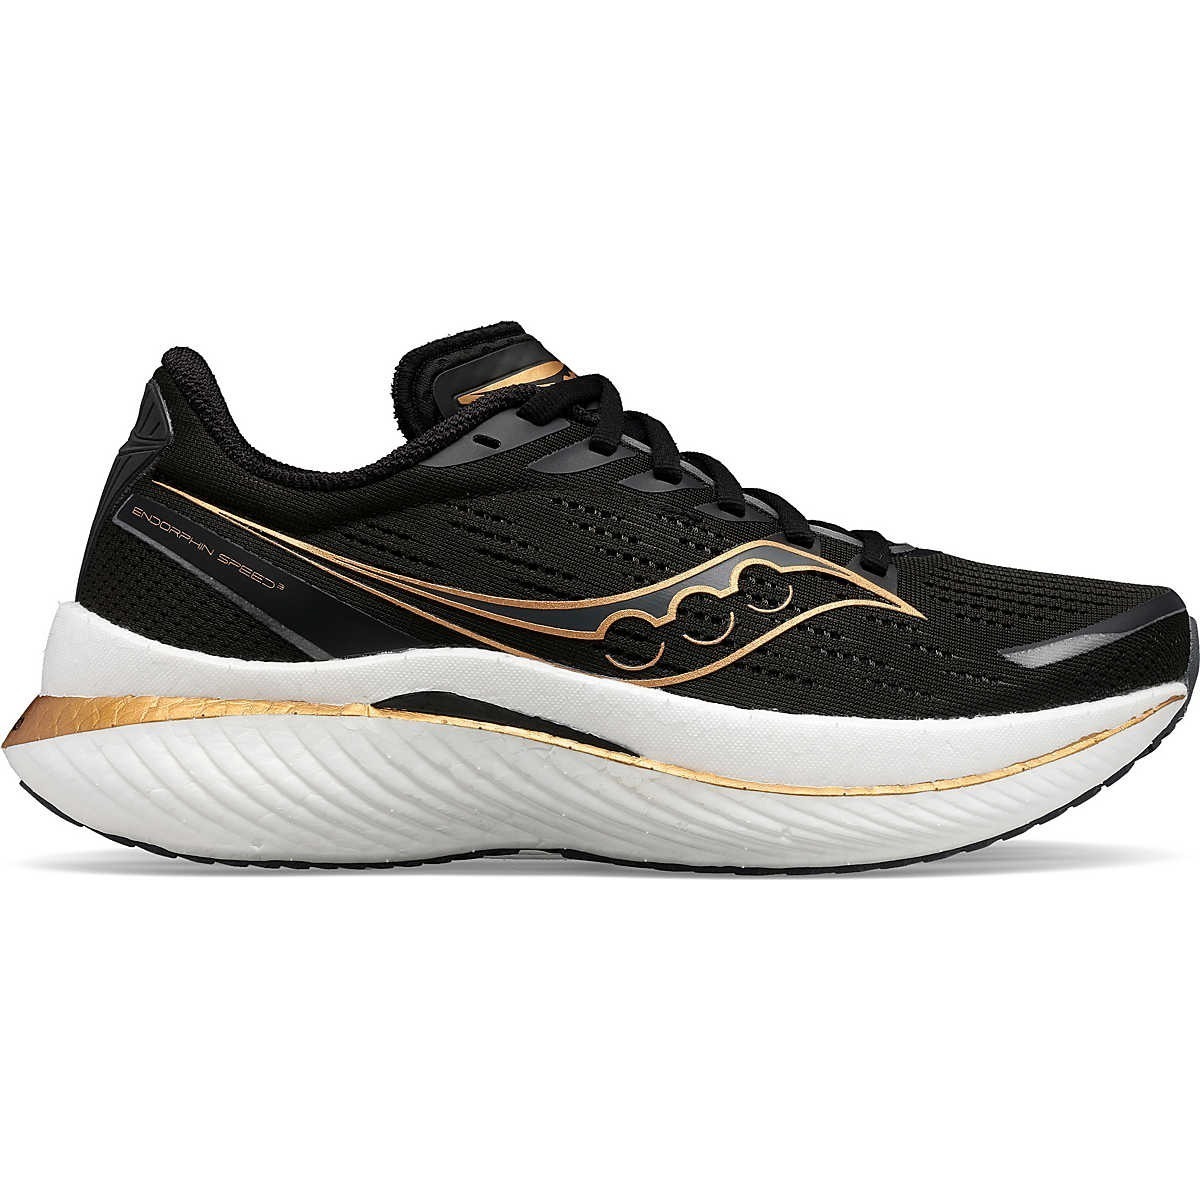 Saucony Men's & Women's Shoes: 20% Off First Order w/ Email or Text Sign Up | Endorphin Speed 3 $136 & More + Free Shipping on Orders $75+